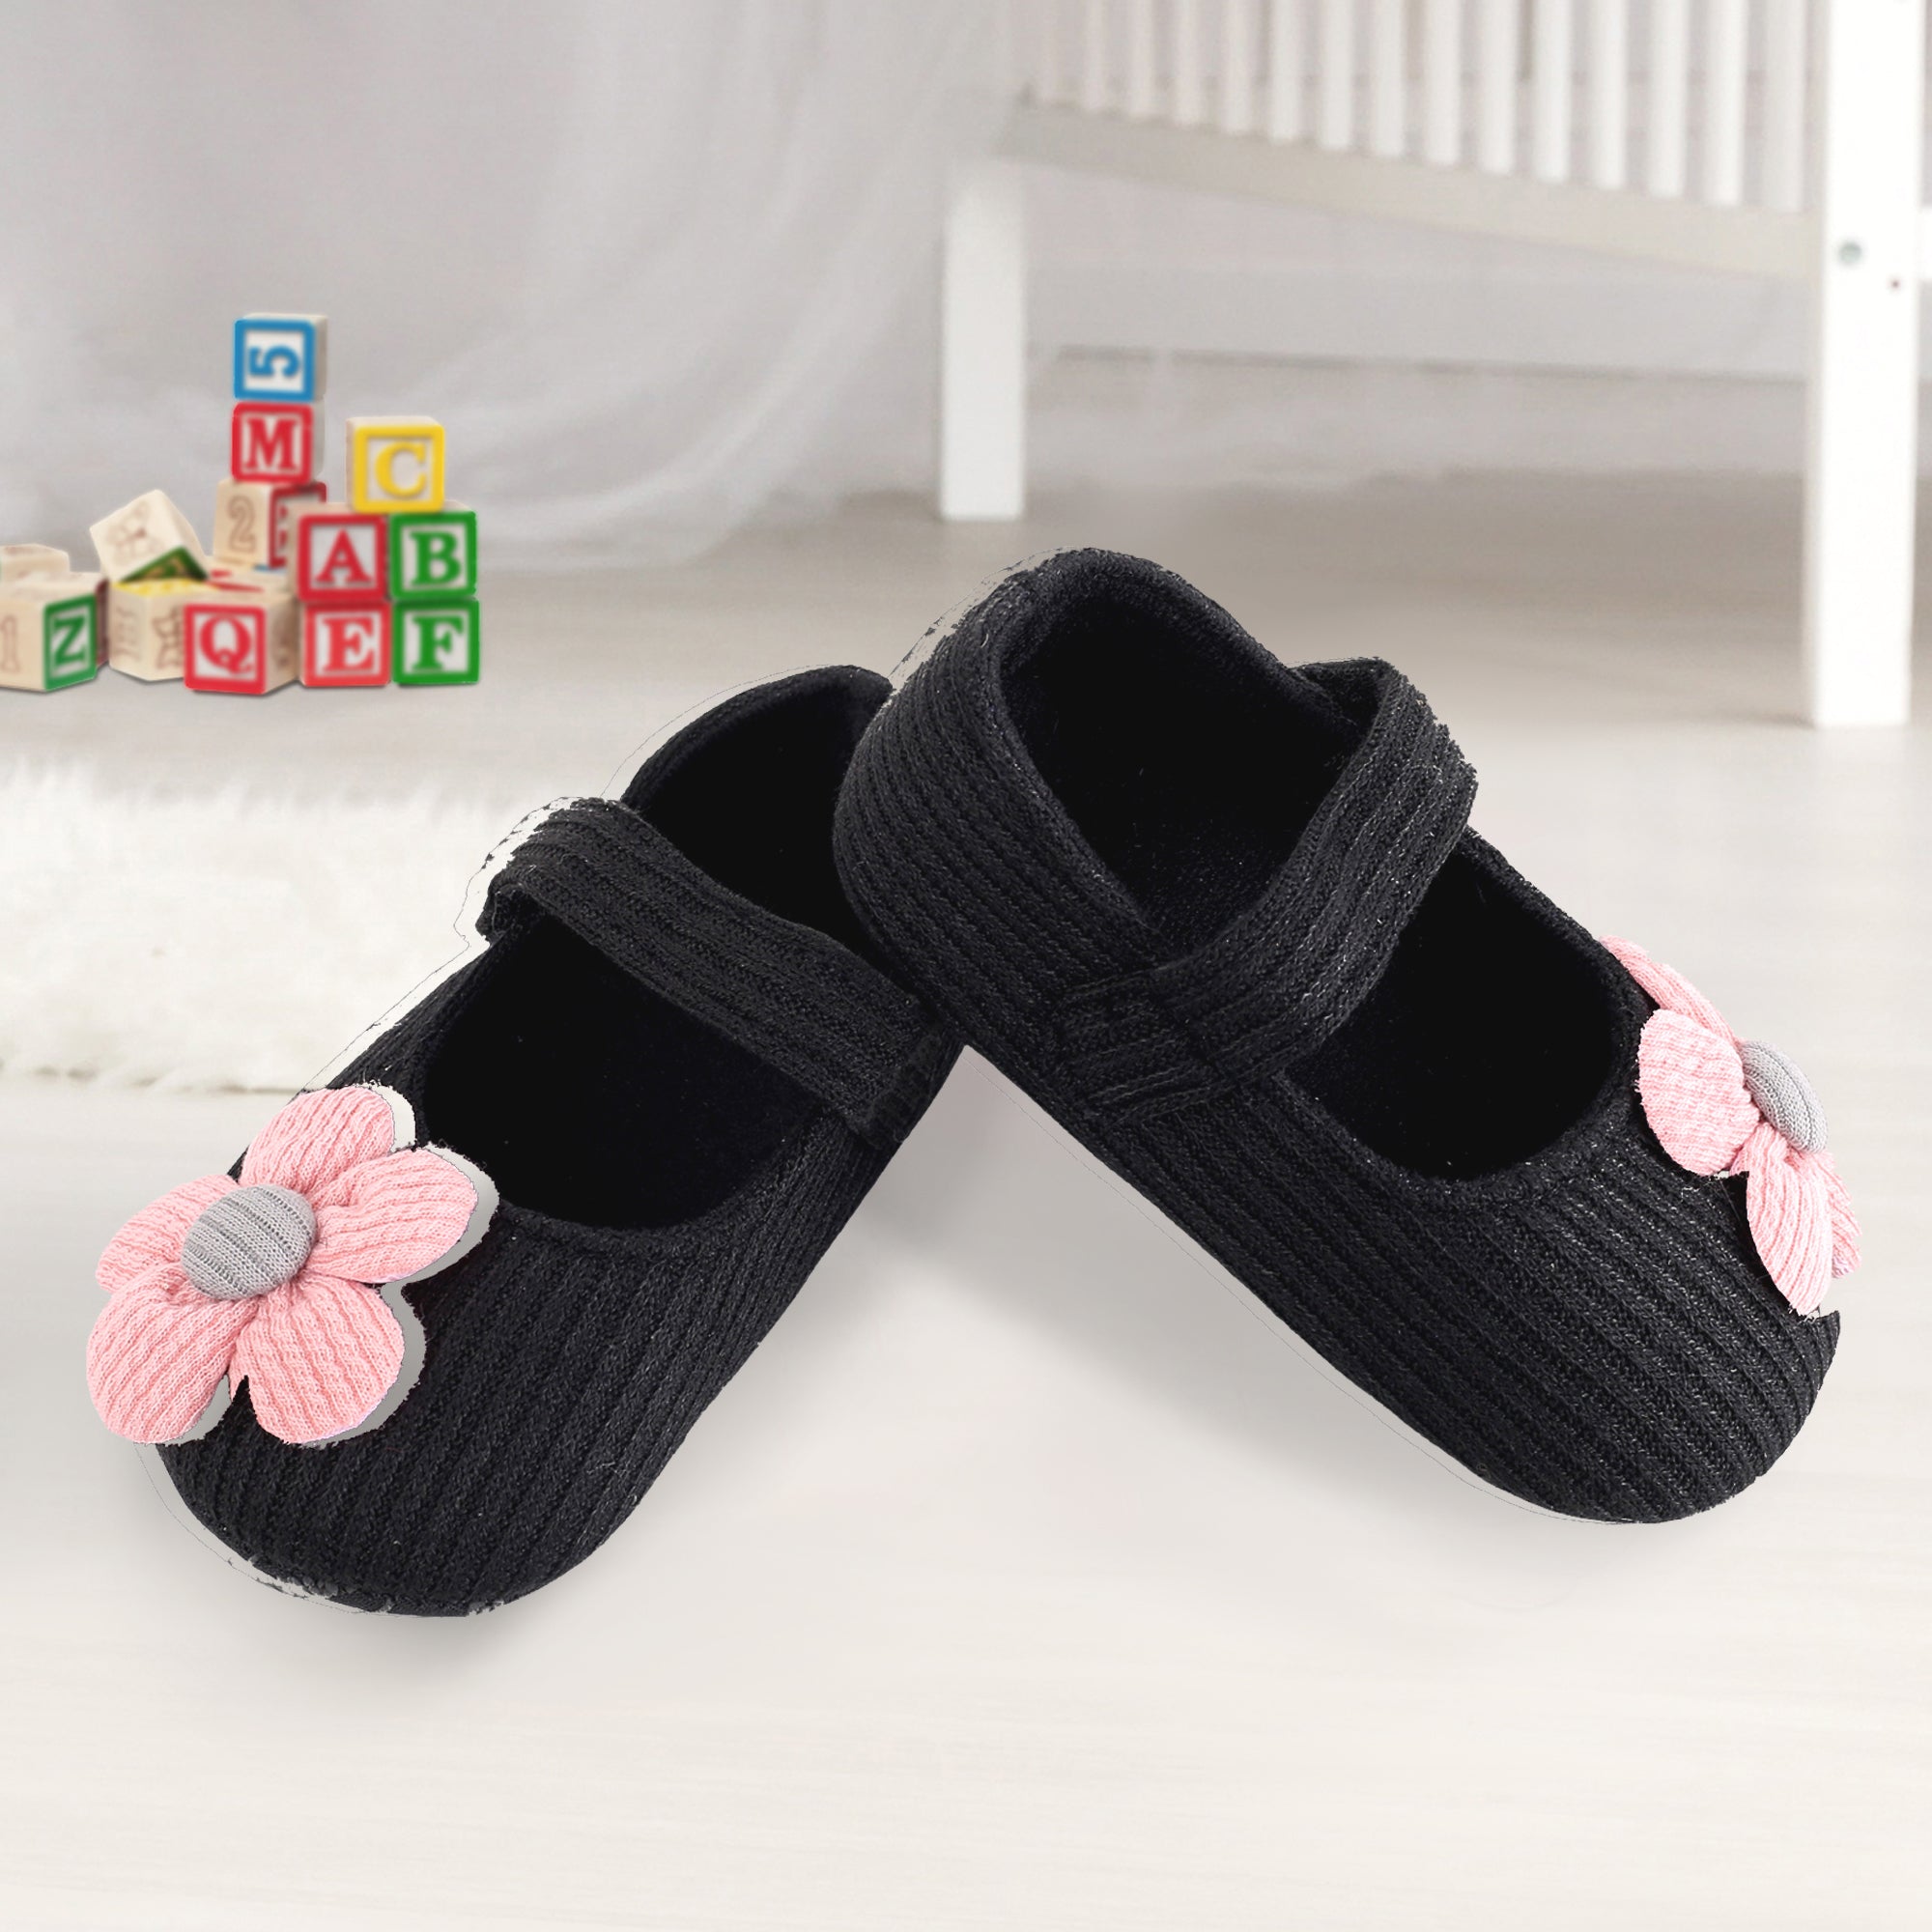 Baby Moo Floral Applique Black And Pink Booties - Baby Moo